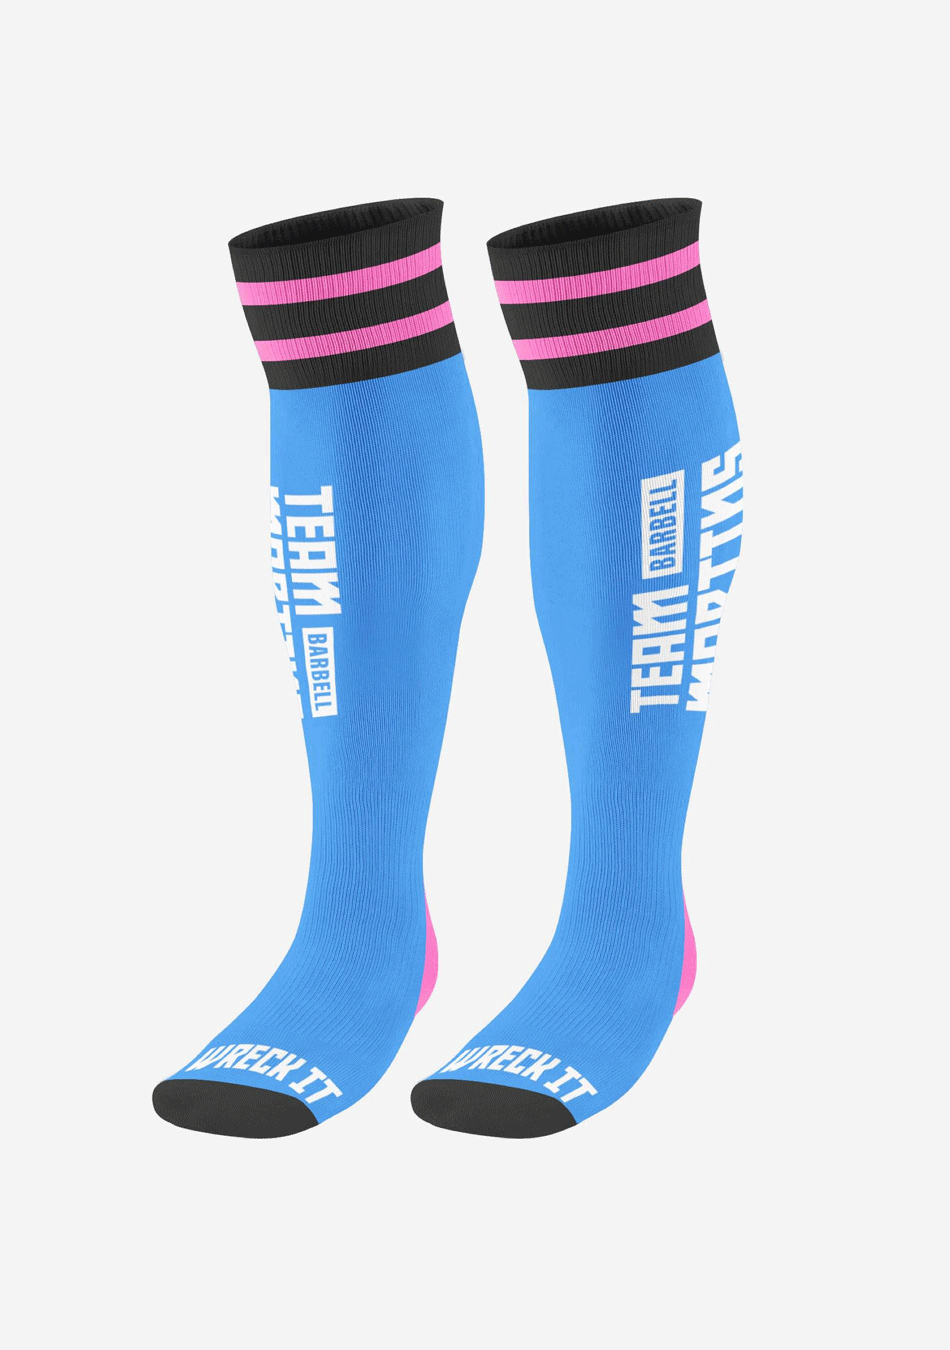 why we made the Wreck It Gym Deadlifting Socks